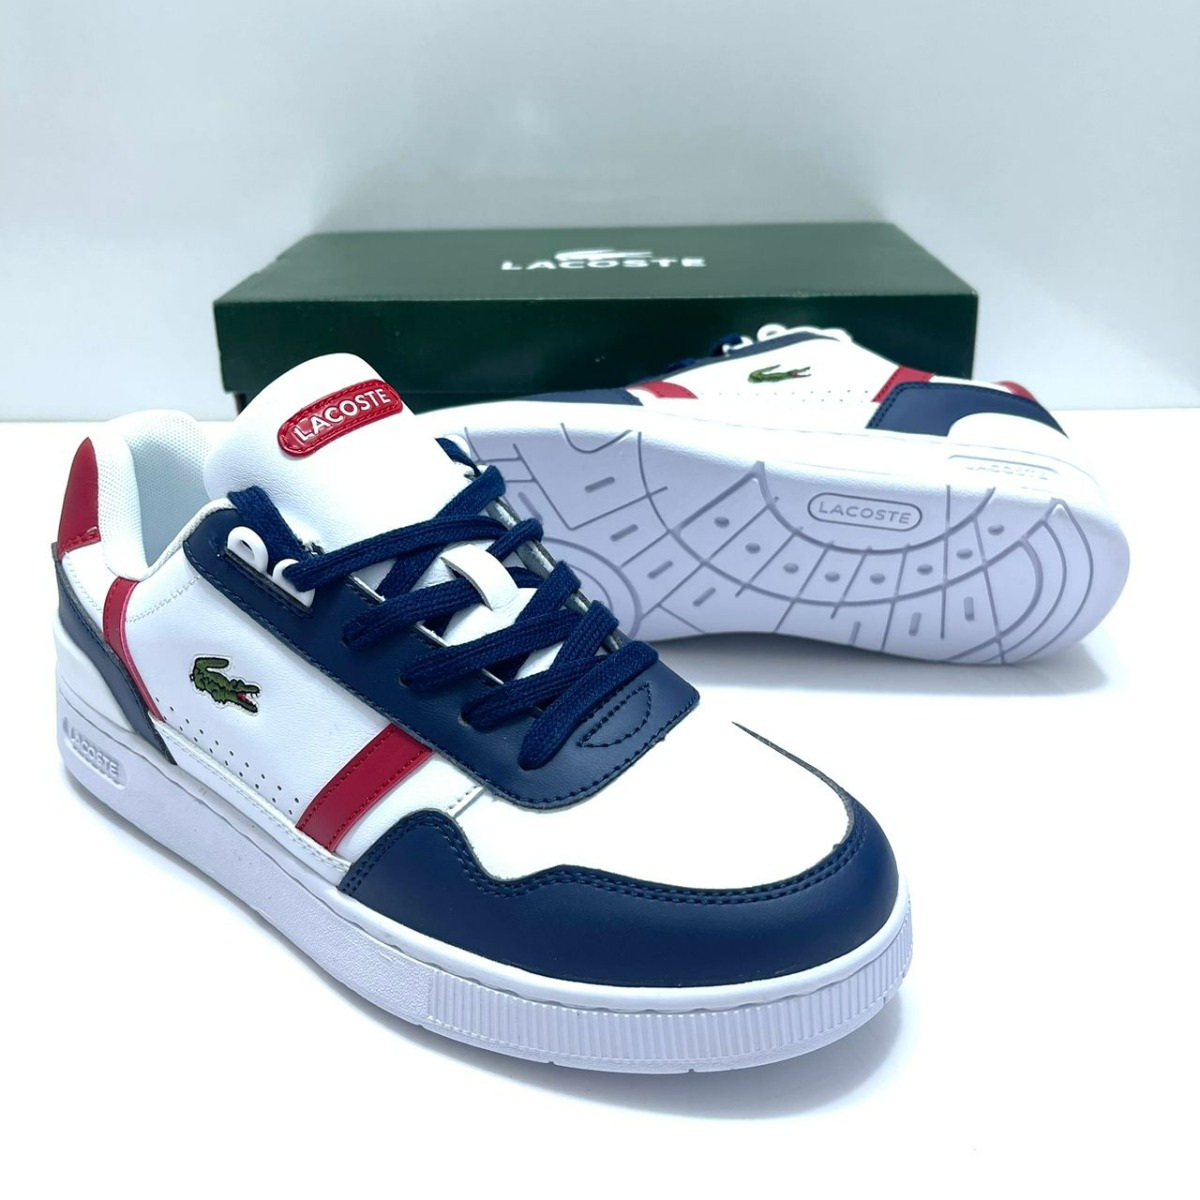 Lacoste Shoes For Men-with free shipping on AliExpress